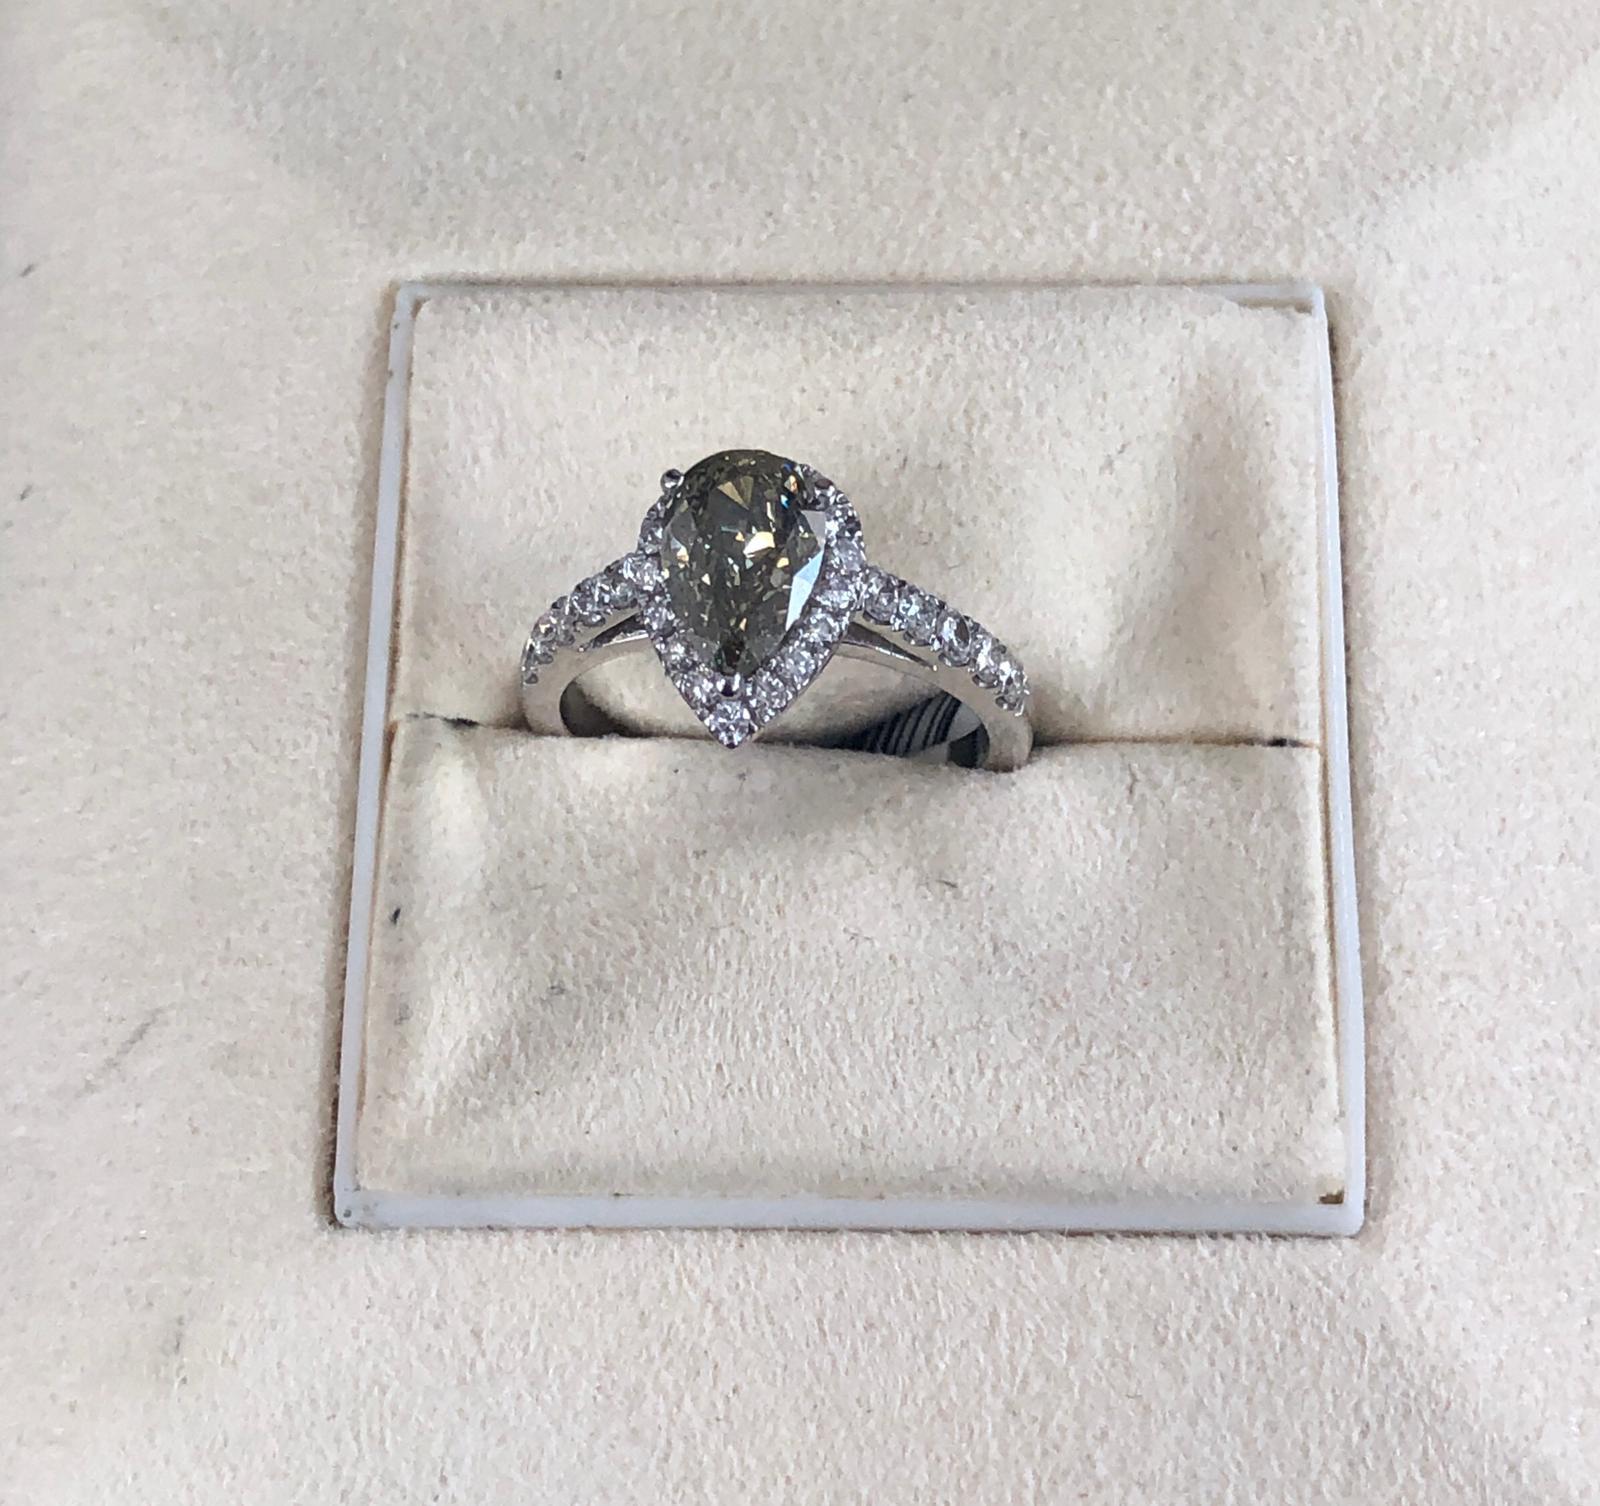 Natural Fancy Dark Gray-Greenish Yellow Pear shape diamond weighing 1.35 carats by GIA.  Half way paved white diamonds in the halo setting. Its transparency and luster are excellent. set on 18K white gold, this ring is the ultimate gift for